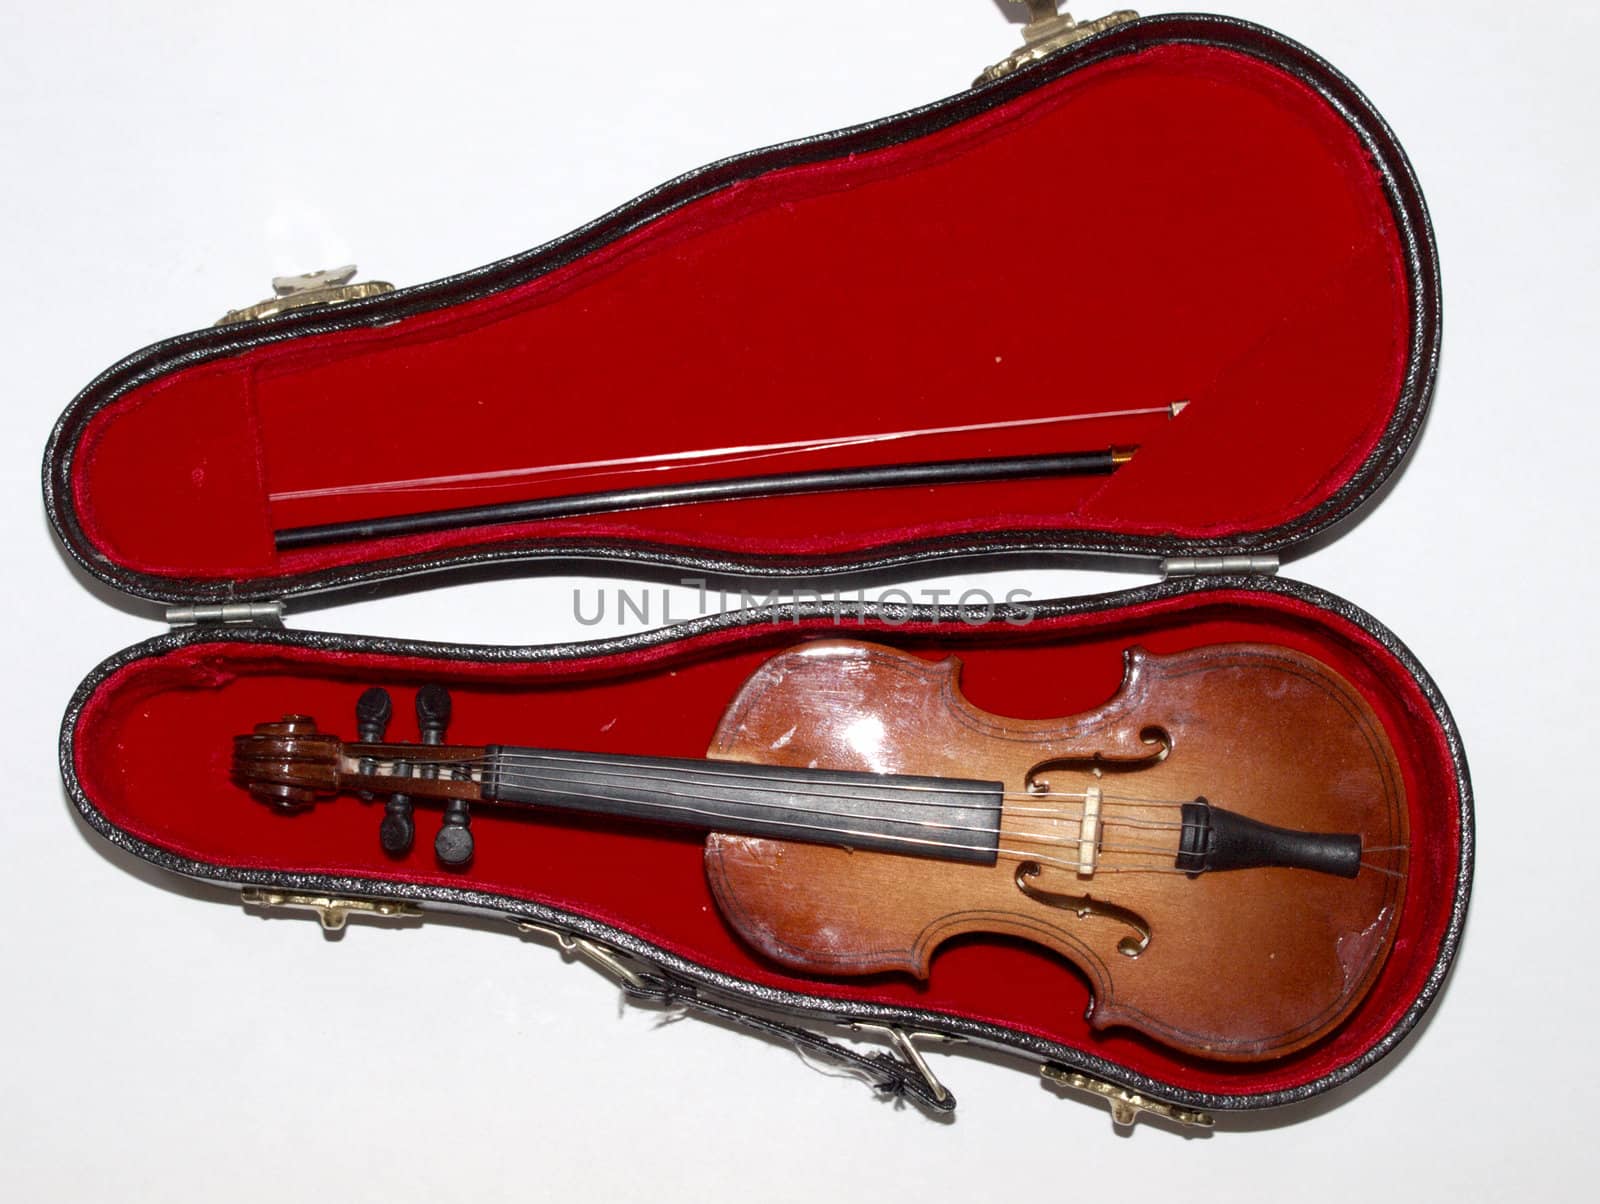 Small model of fiddle